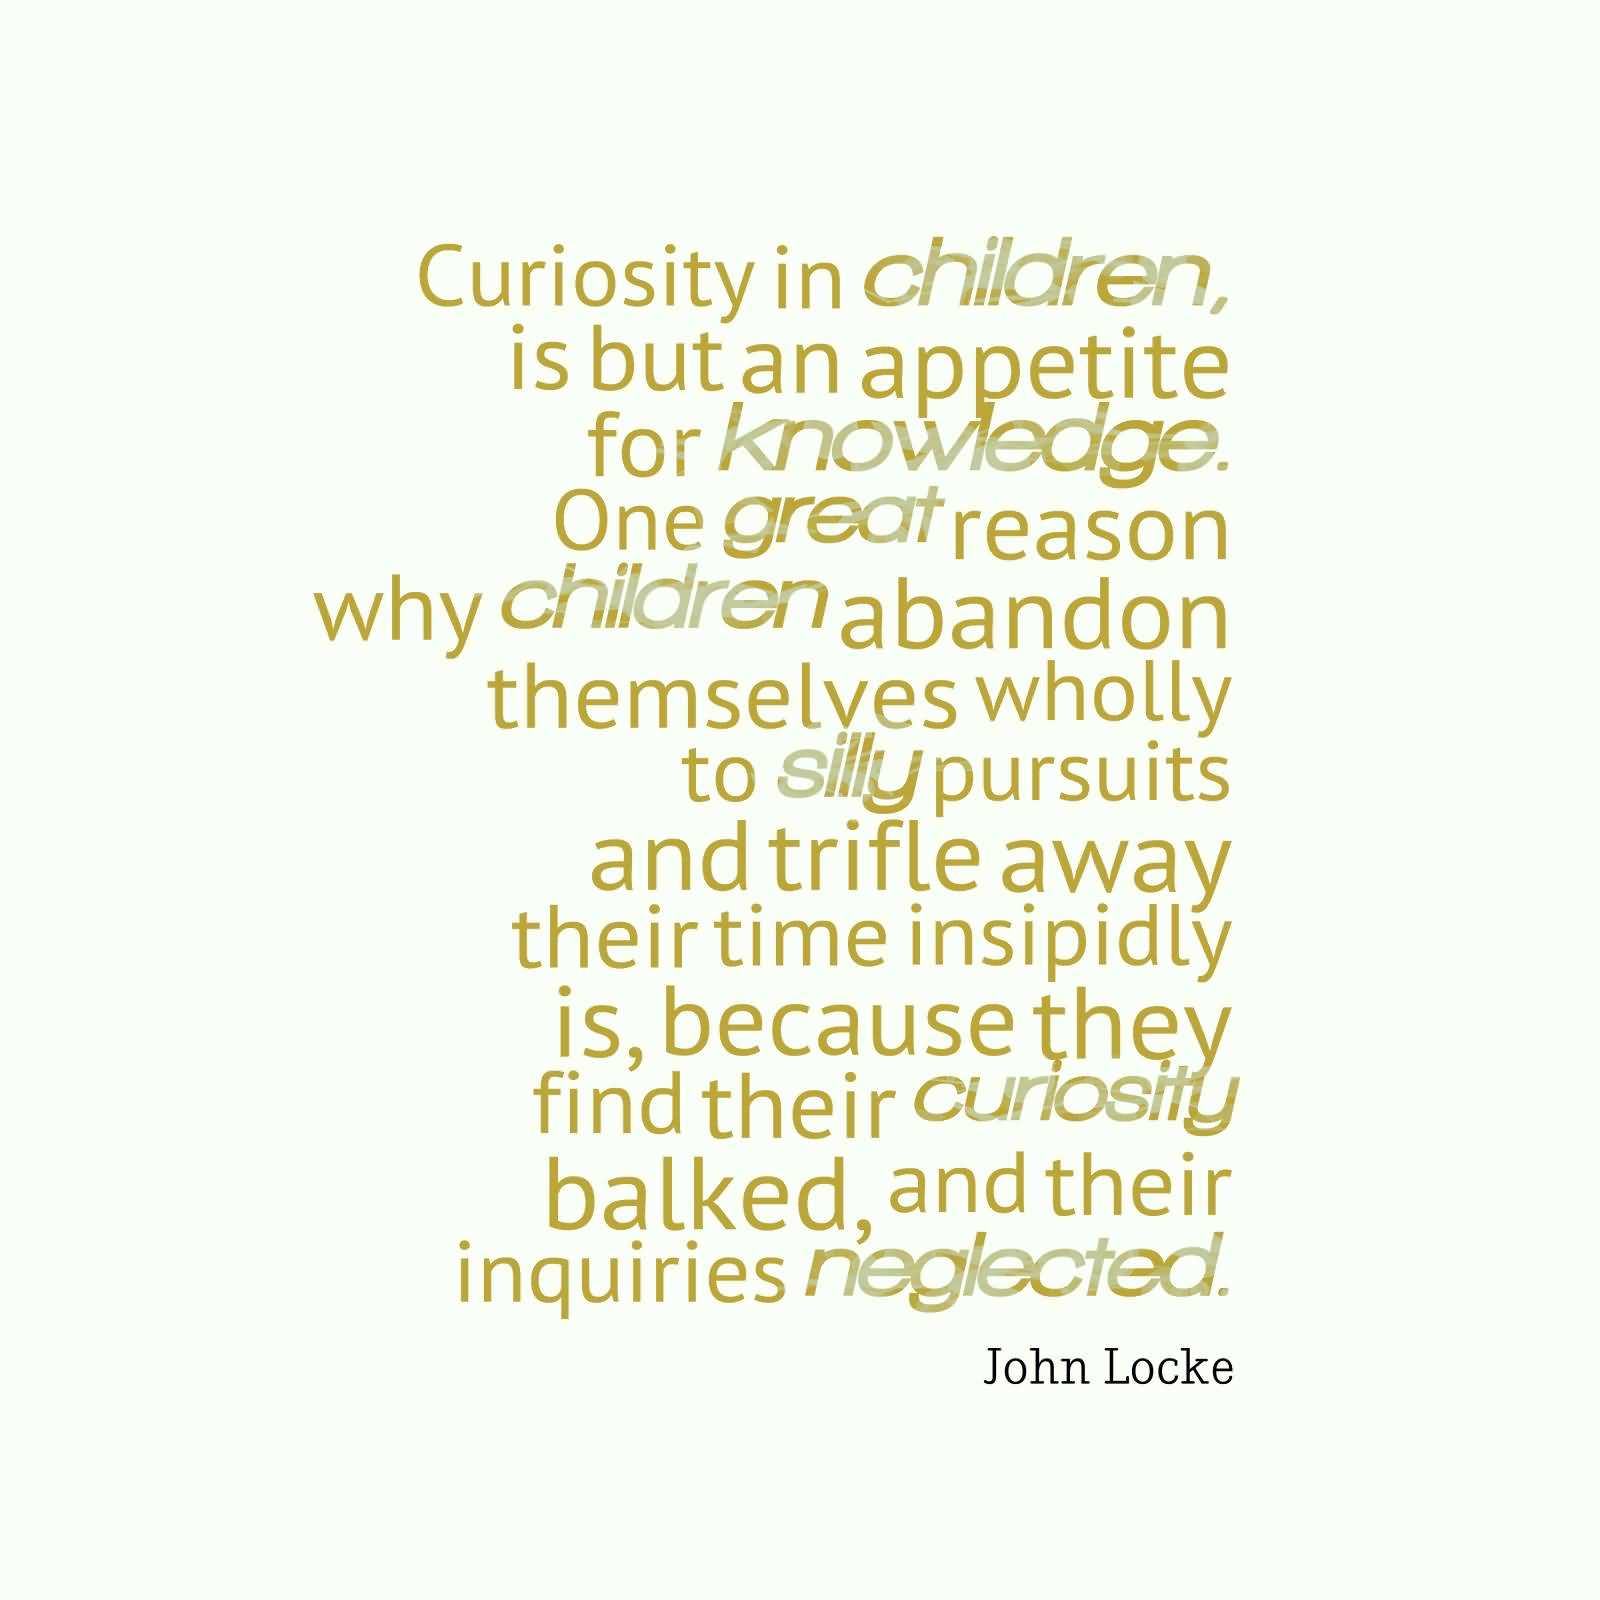 Curiosity in children, is but an appetite for knowledge. One great reason why children abandon themselves wholly to silly pursuits and trifle away their time insipidly is, because they find their curiosity... - John Locke